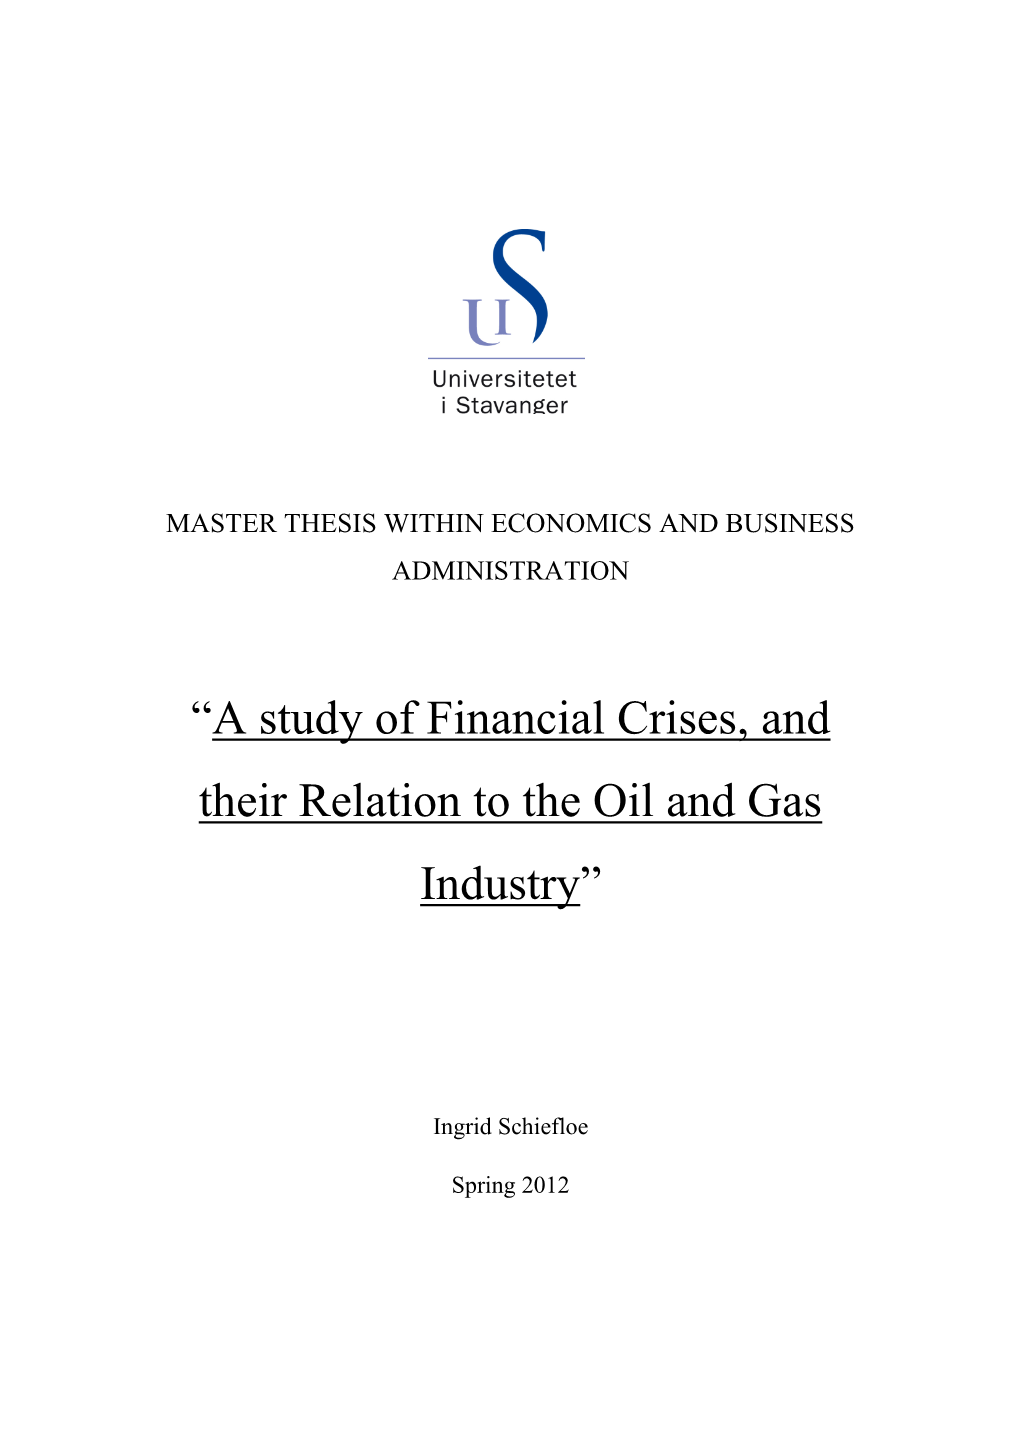 A Study of Financial Crises, and Their Relation to the Oil and Gas Industry”